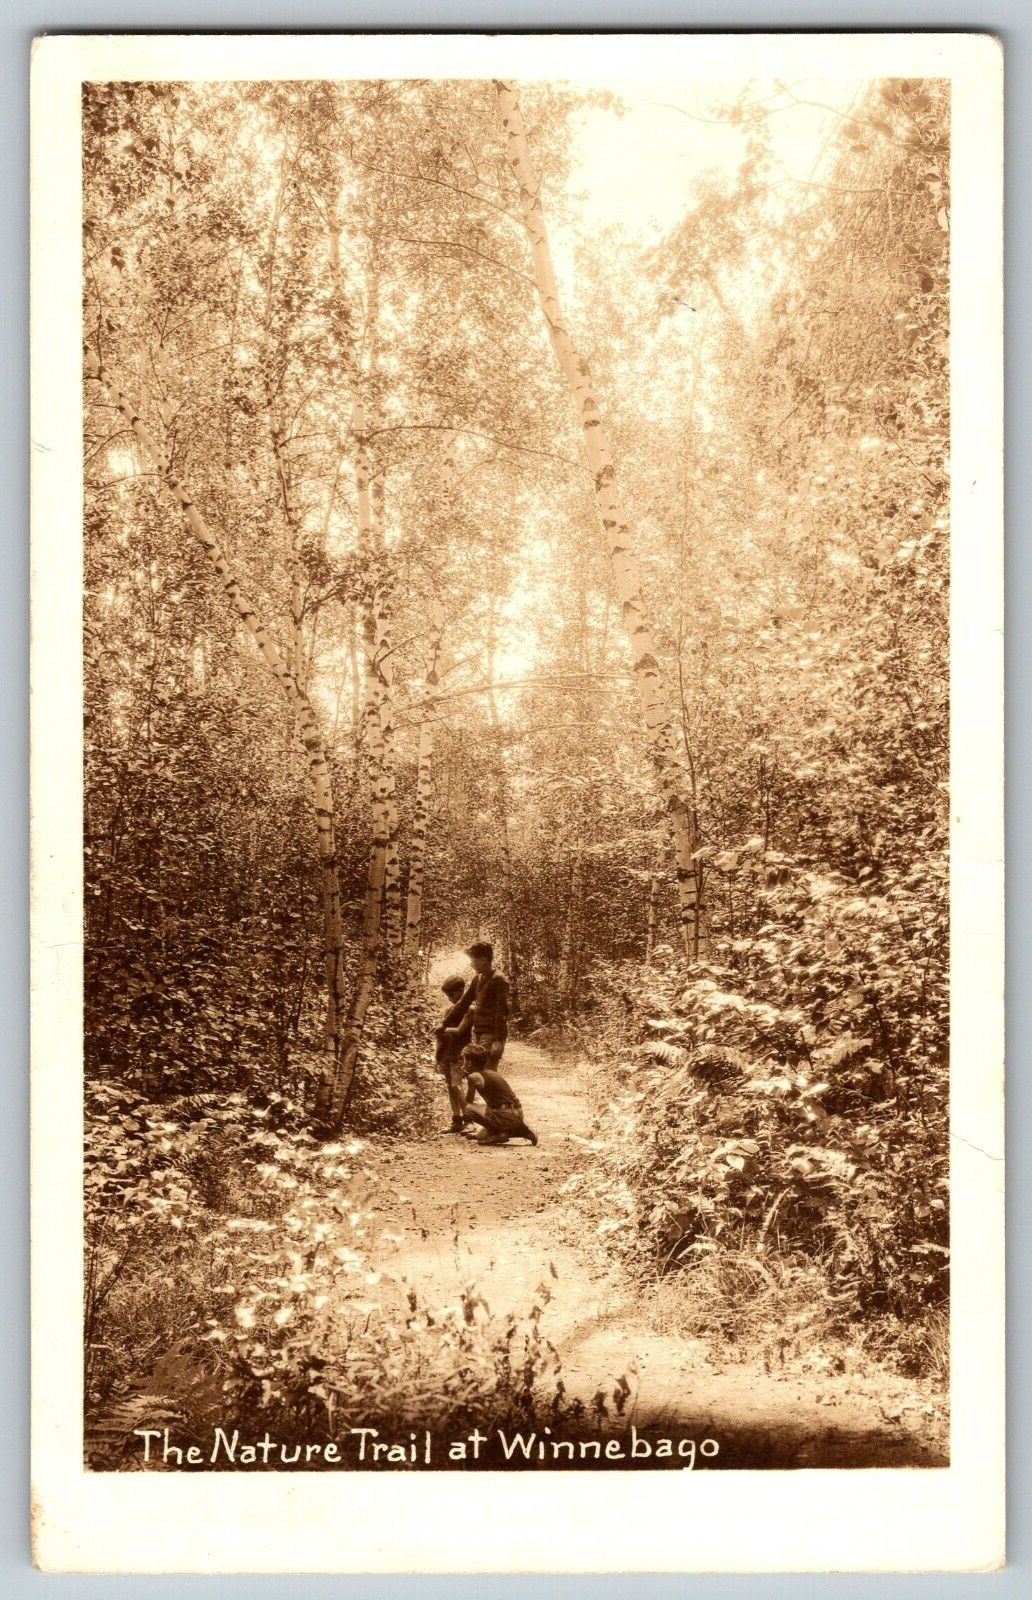 RPPC Vintage Postcard - The Nature Trail at Winnebago - Real Photo - Posted